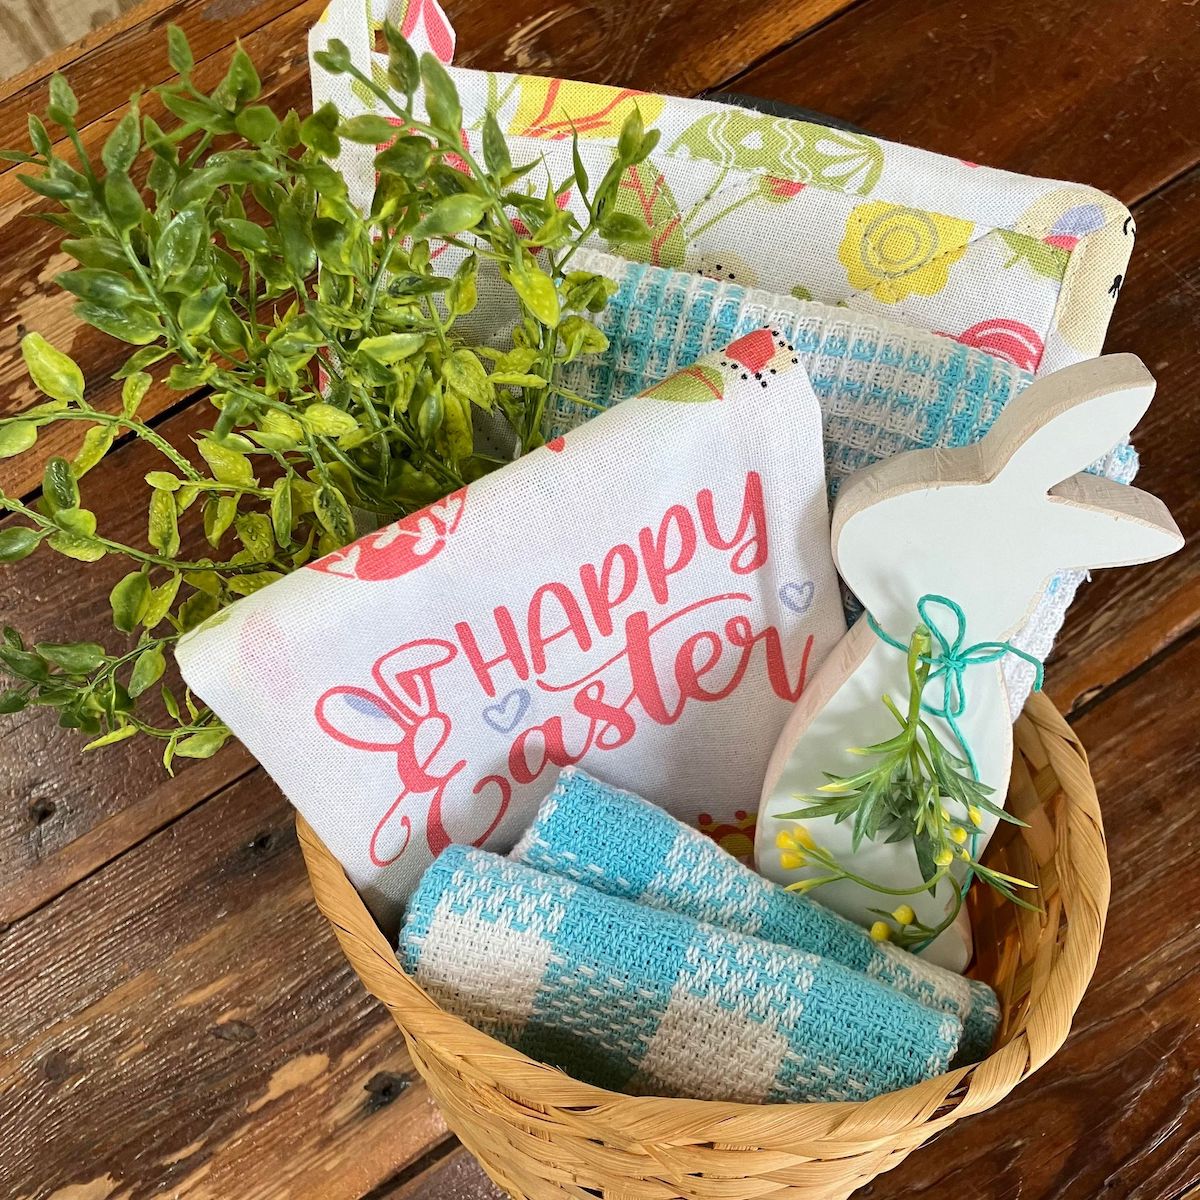 Easter Gift Basket: Kitchen Towel, Pot Holder, Wooden Rabbit and Aqua Plaid Kitchen Towel and Dish Clothes with Green Sprig